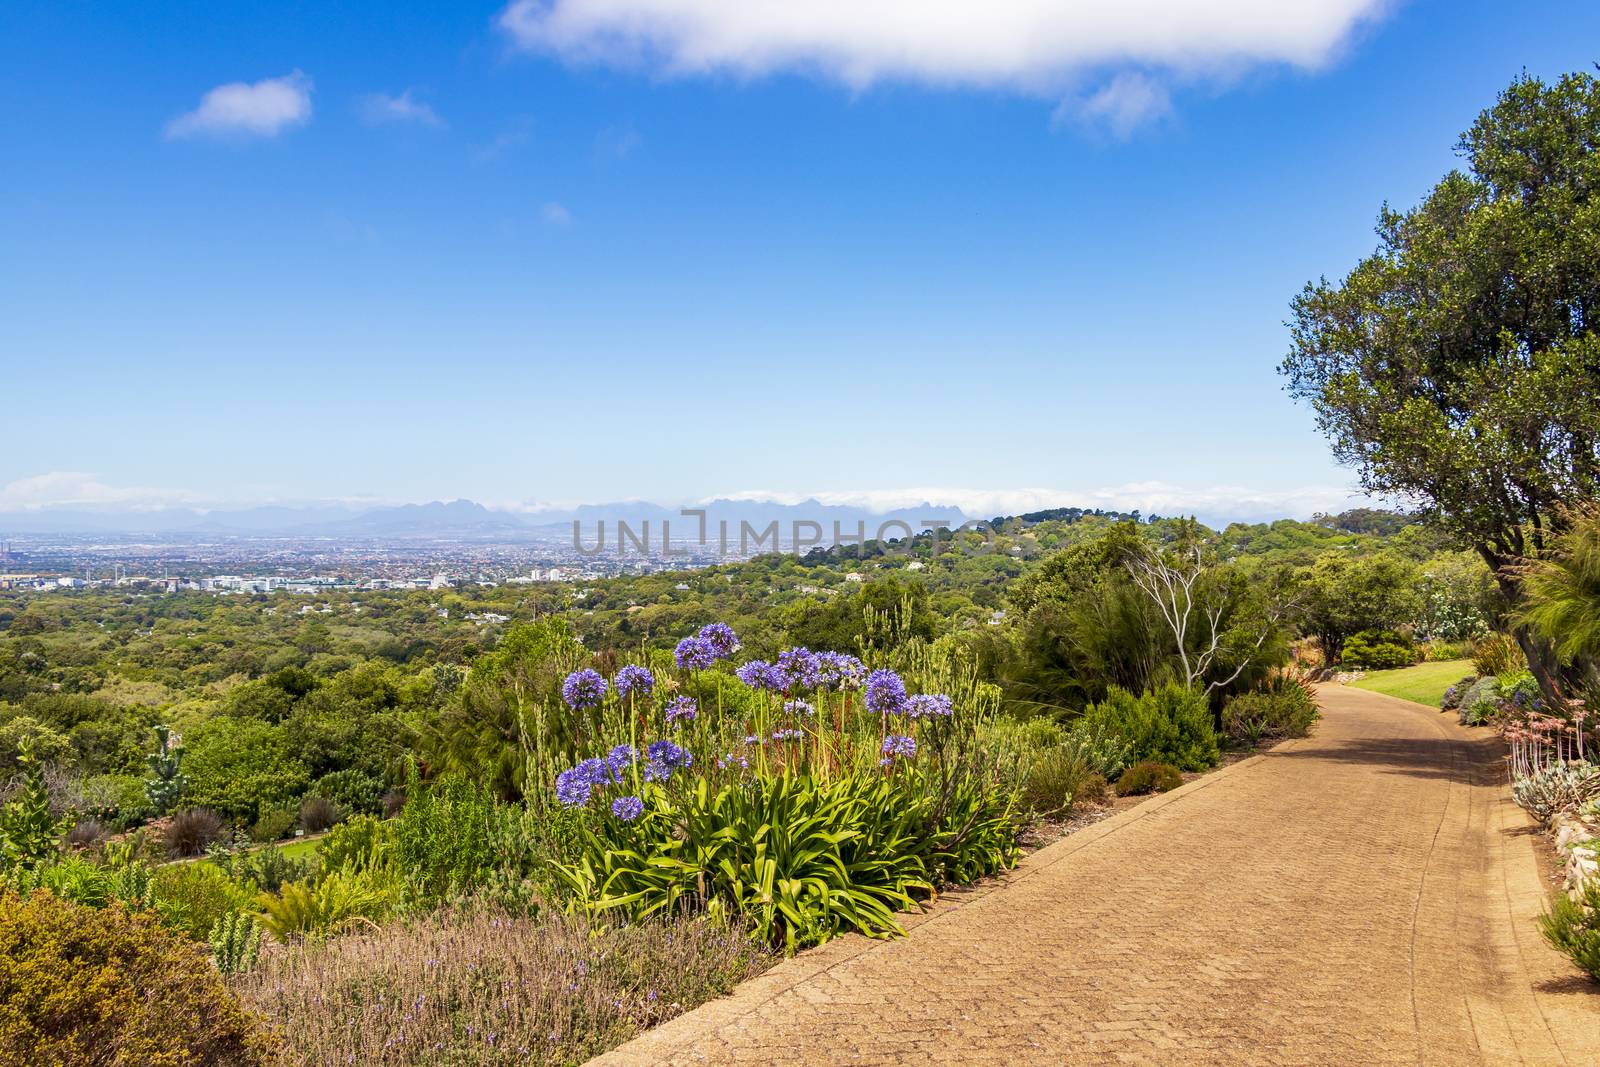 Panoramic view of Cape Town and trail Walking path in Kirstenbosch National Botanical Garden, South Africa.